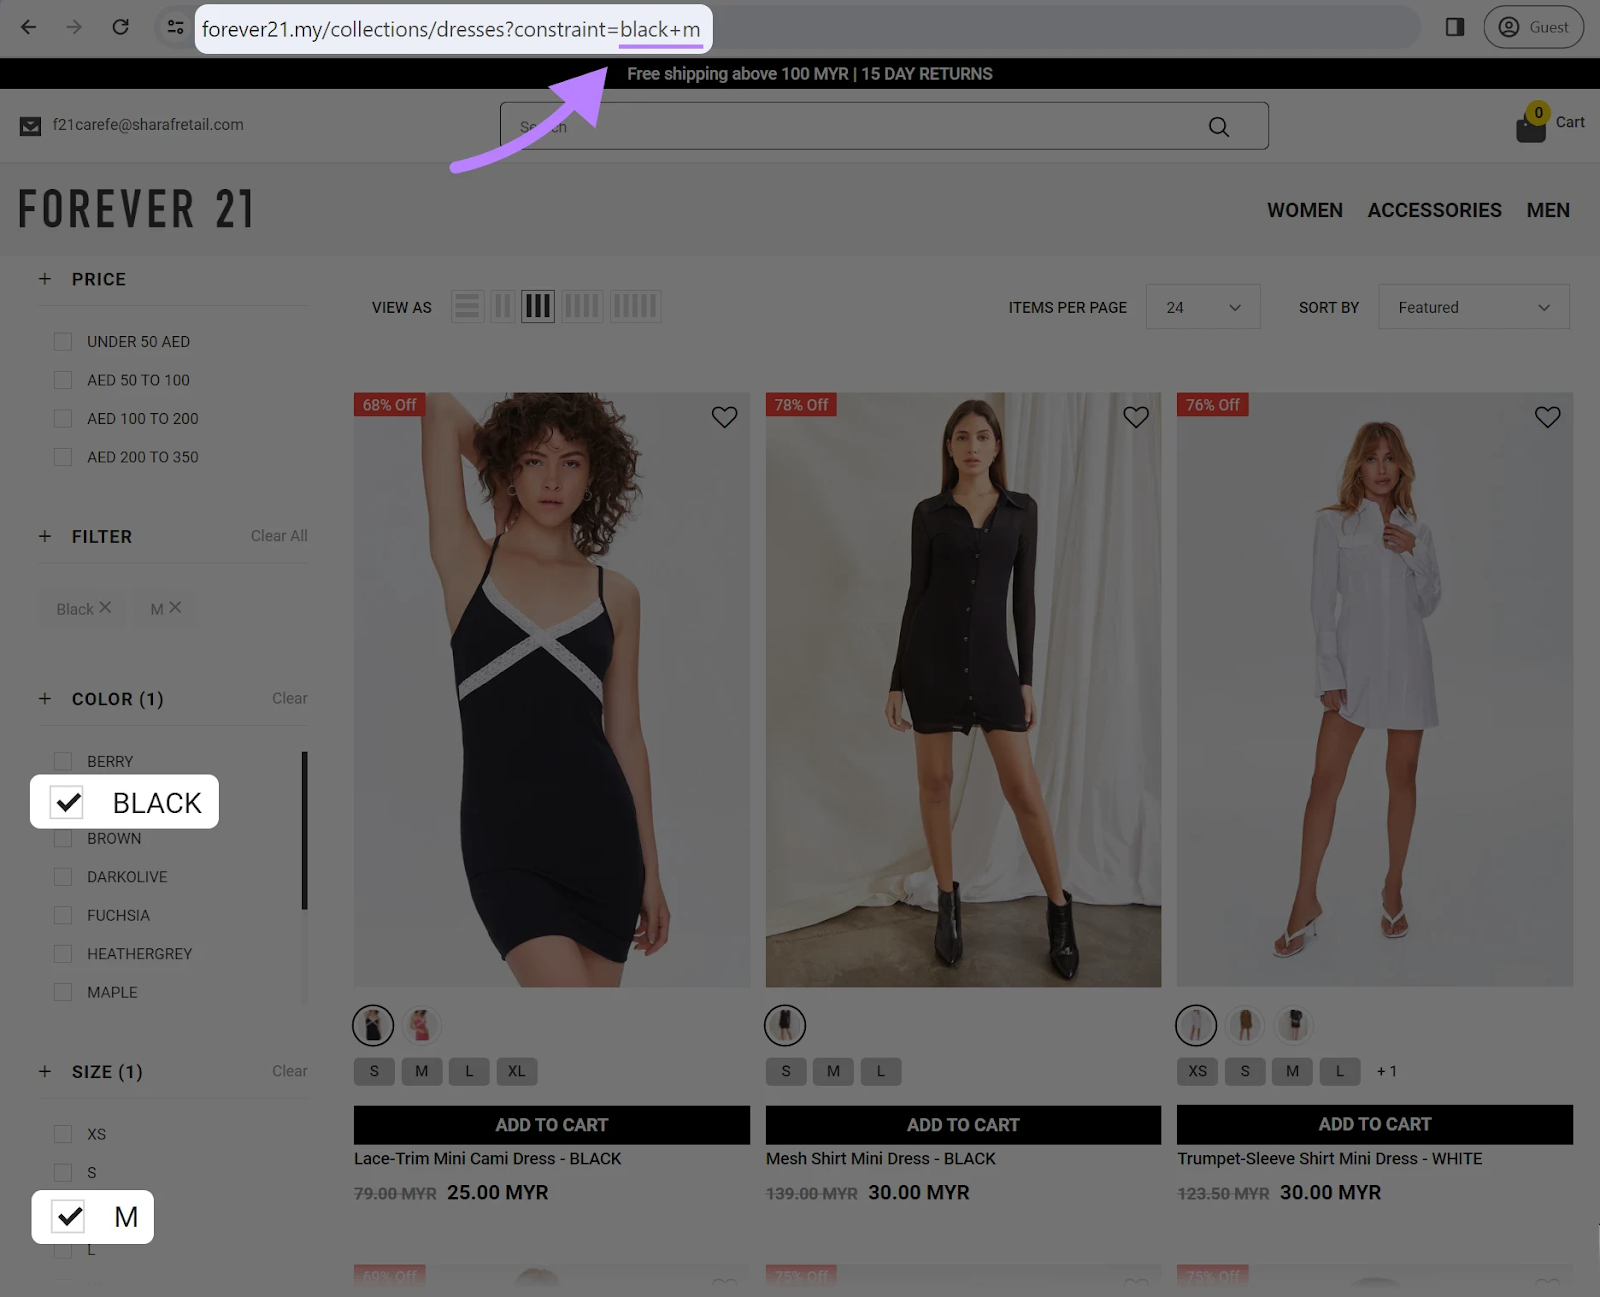  "forever21.my/collections/dresses?constraint=black+m"